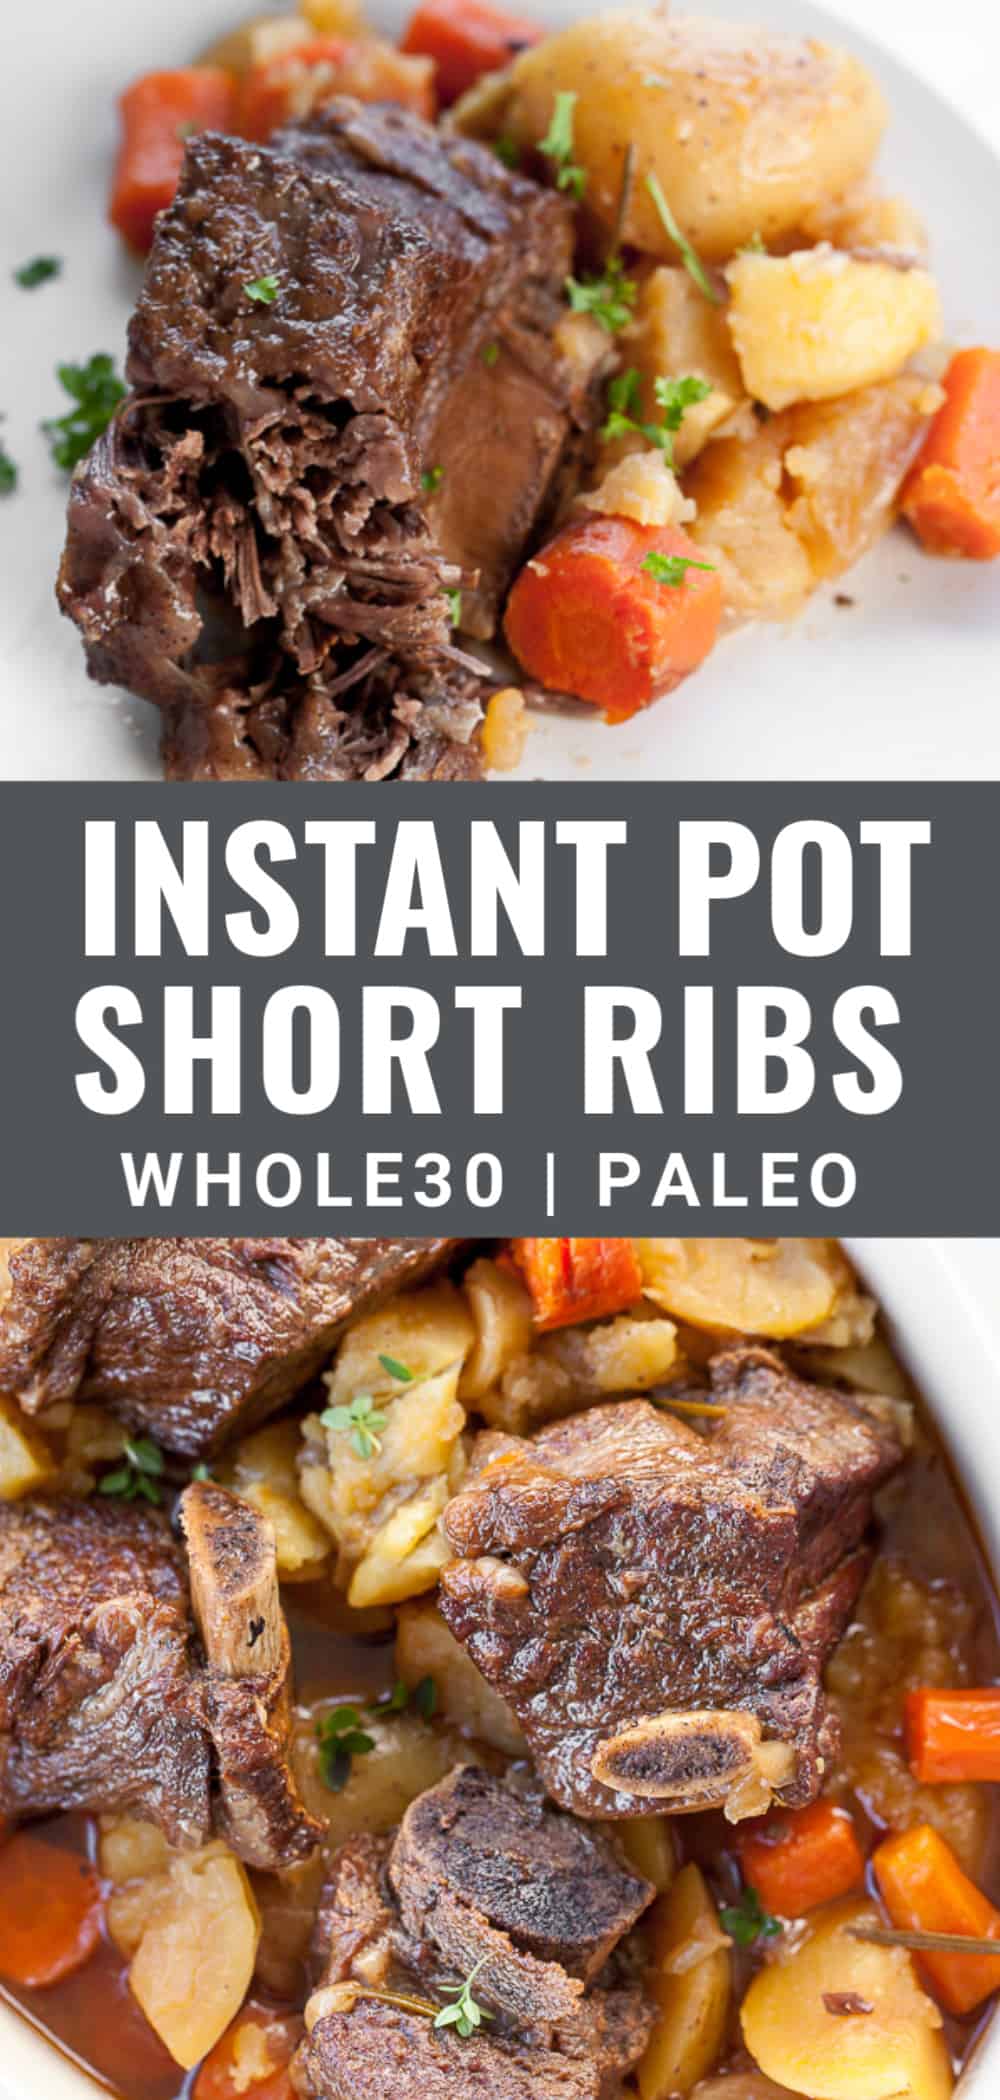 Healthy Instant Pot Beef Short Ribs - (Whole30 & Paleo Dinner)